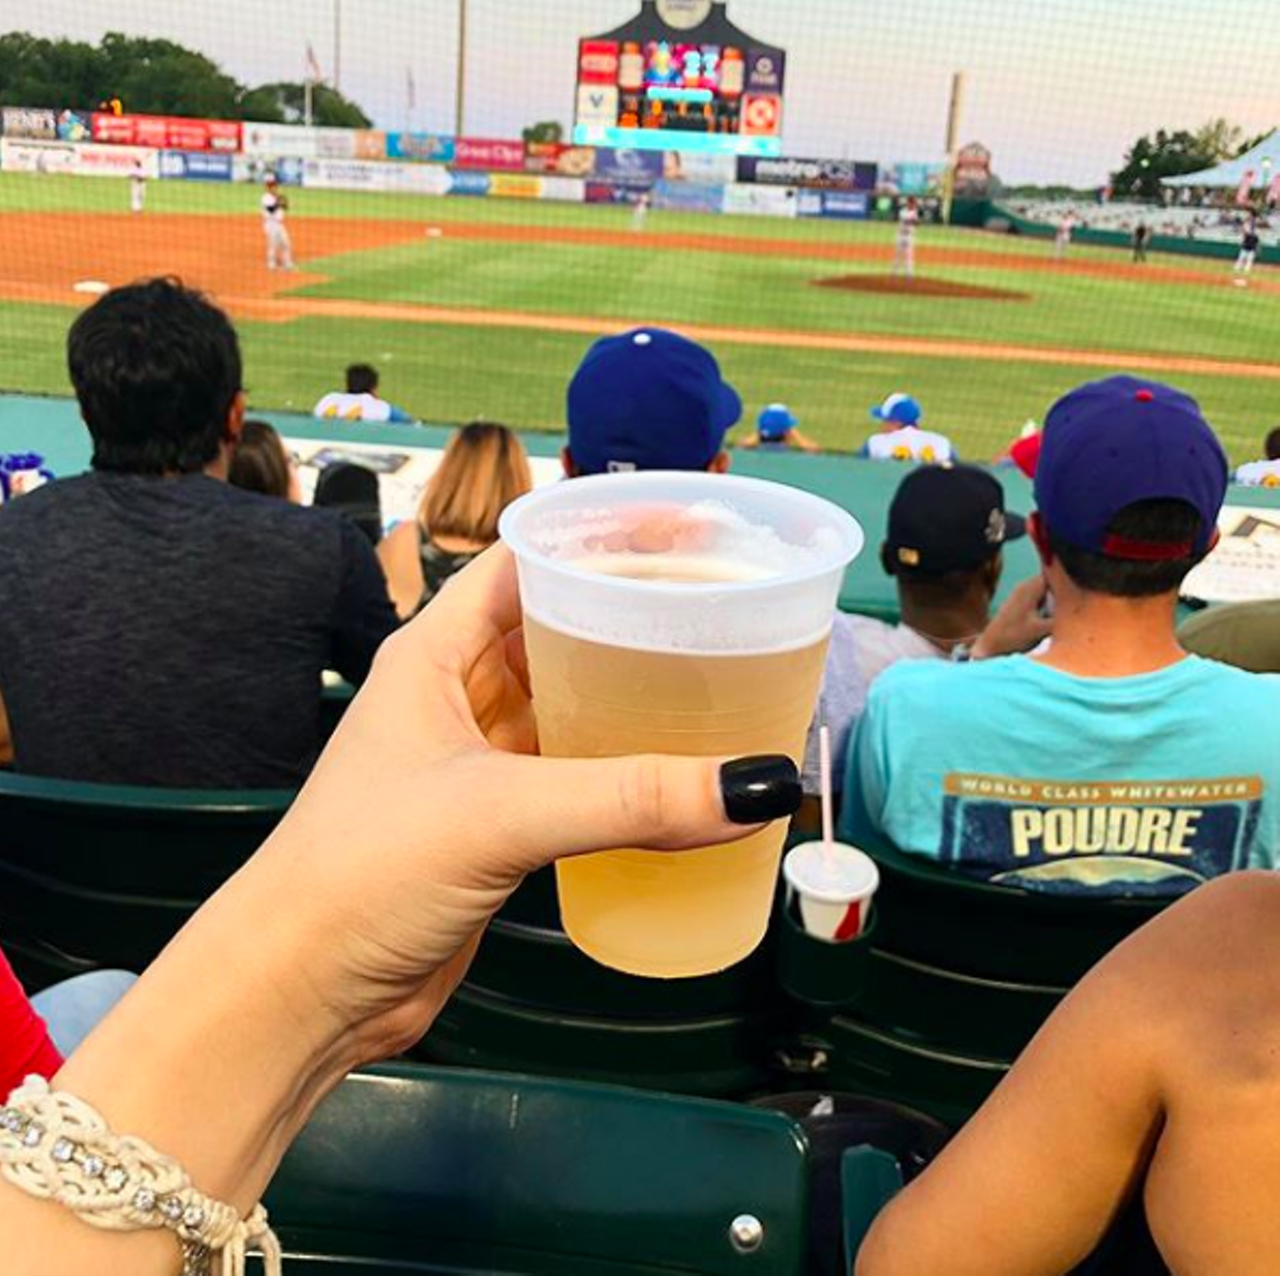 Catch a San Antonio Missions game
5757 US-90, milb.com
With just a few games remaining through early September, you’ll definitely want to go out to the ballpark. Tickets are super cheap, meaning you’ll be able to take the entire family or crew for a reasonable price. Plus, nights here are equally entertaining and memorable.
Photo via Instagram / anncrystal714